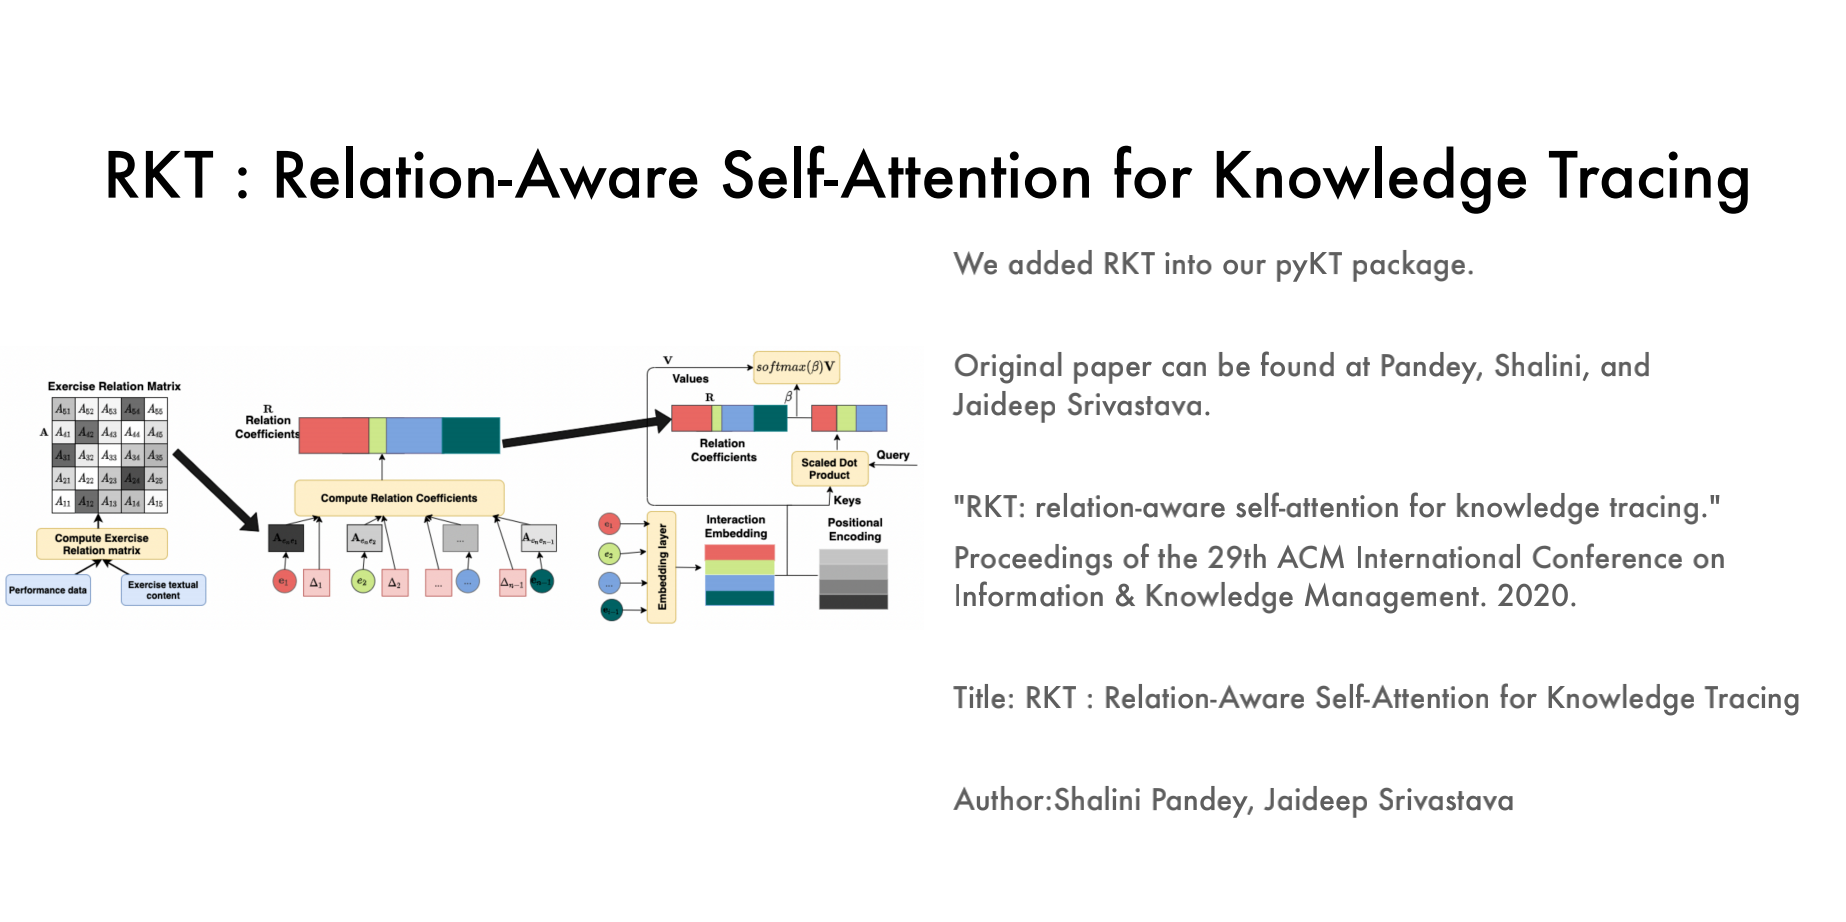 RKT: relation-aware self-attention for knowledge tracing